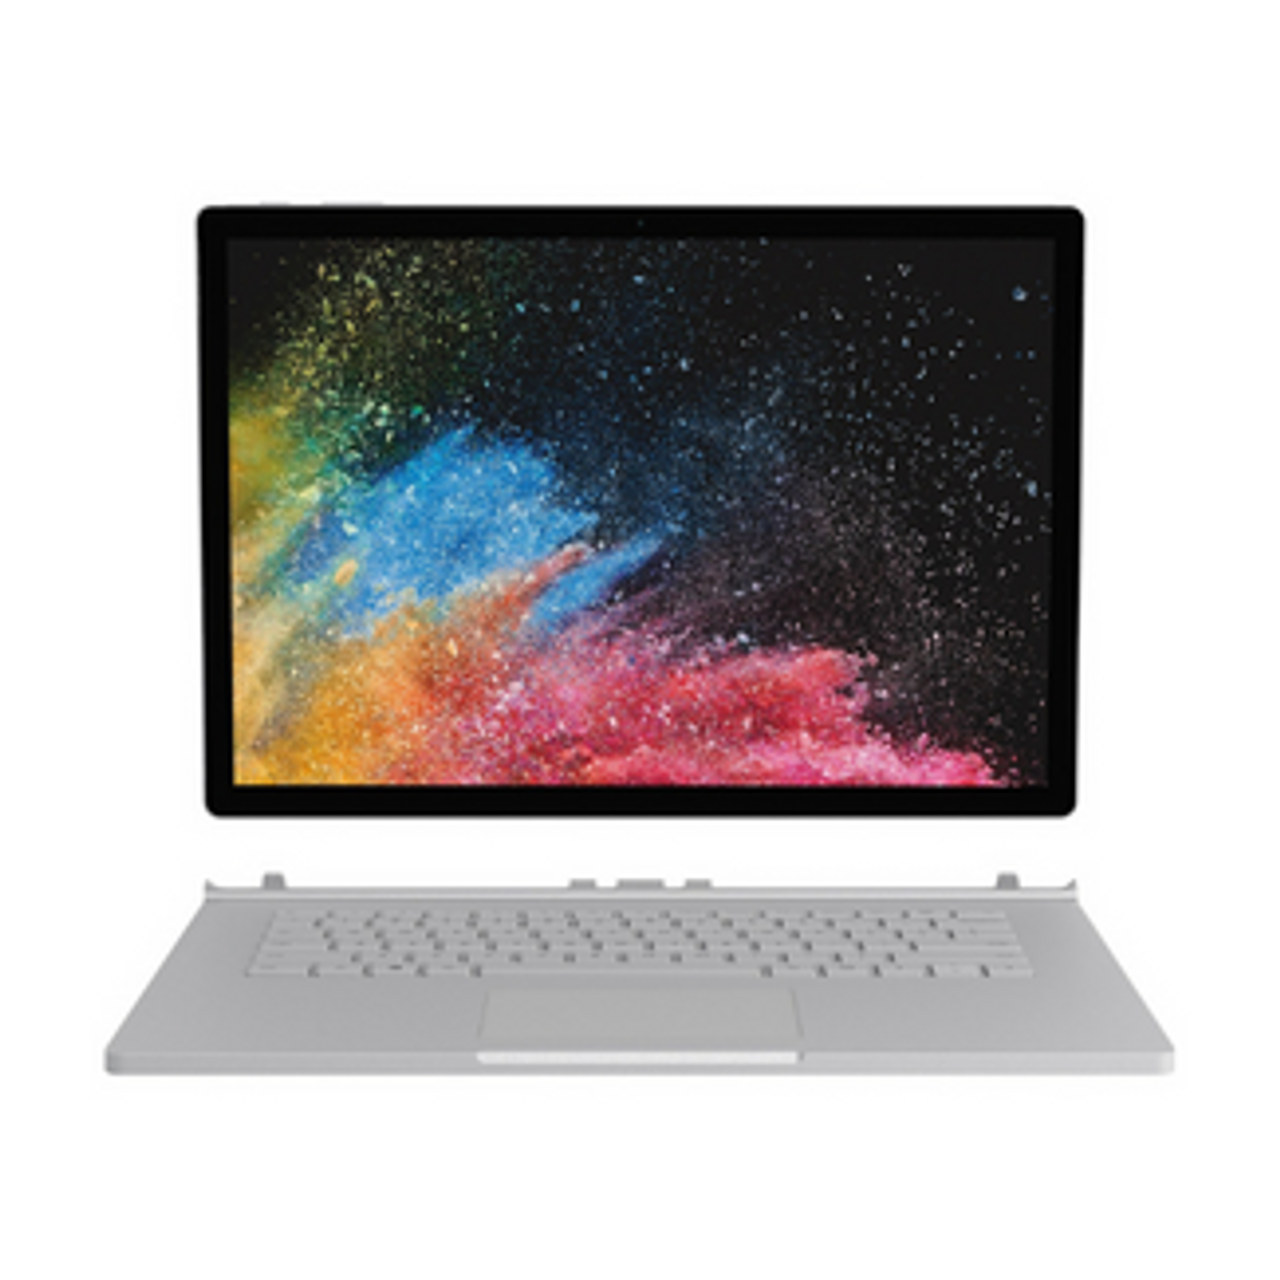 Microsoft Surface Book - Intel Core i7 16GB 512GB - 13 Touchscreen 2-in-1  Laptop - Silver